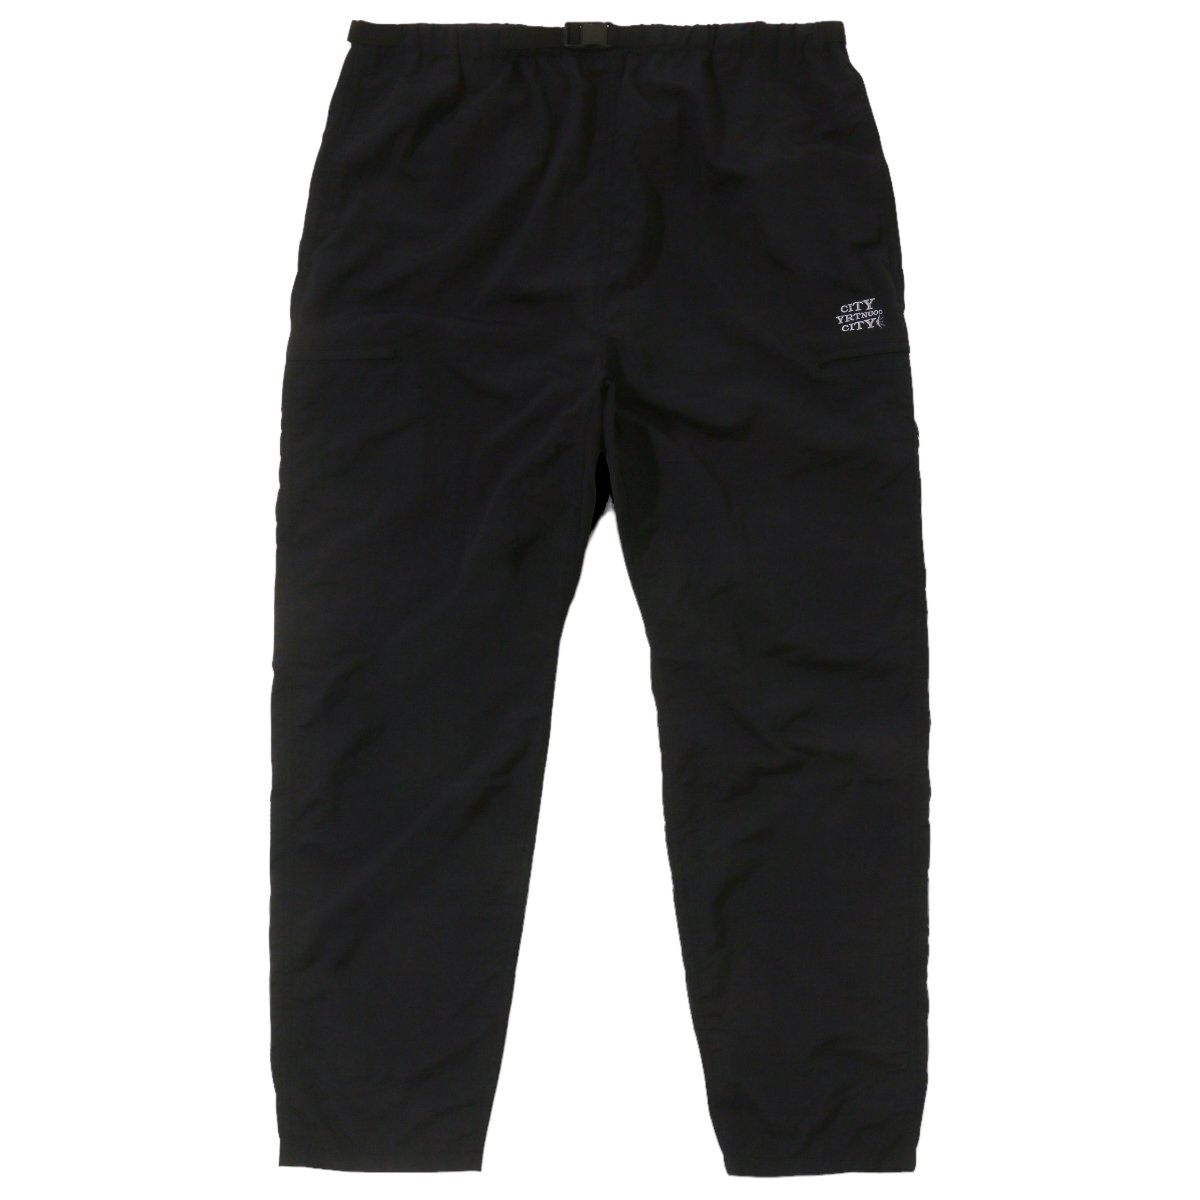 CITY COUNTRY CITY<BR>EMBROIDERED LOGO NYLON PANTS(BLACK)